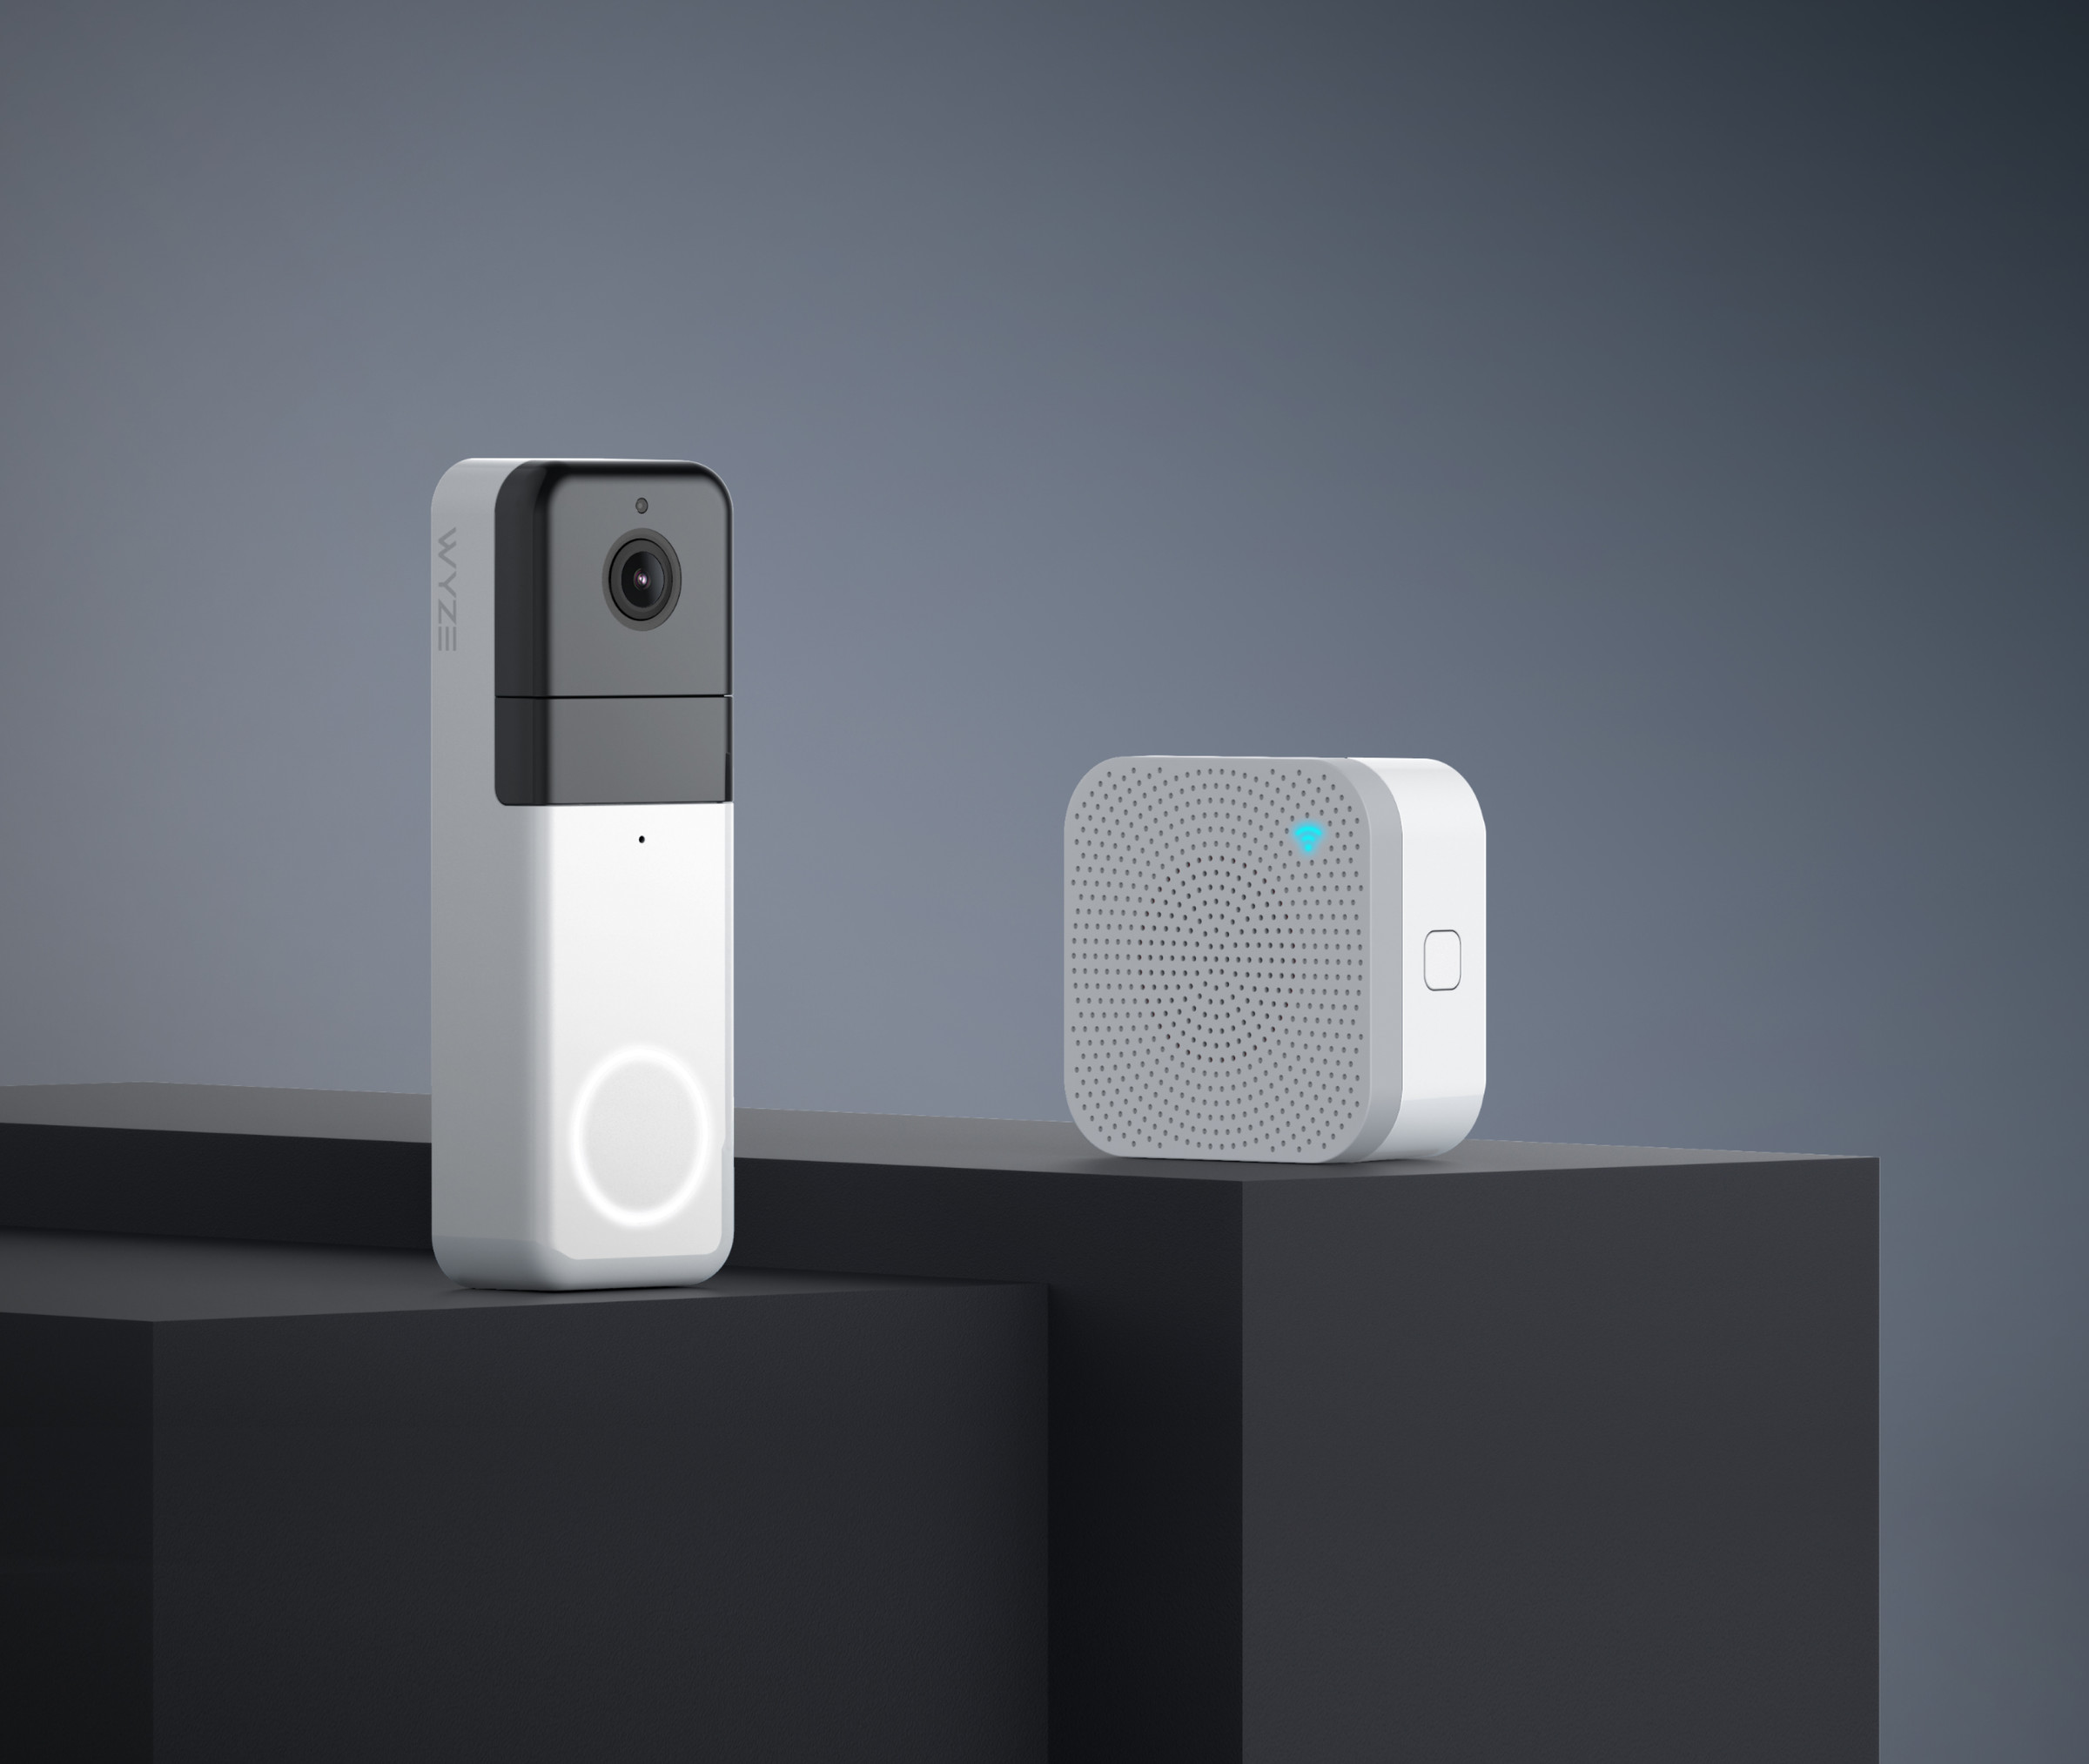 Wyze’s new doorbell comes with a wireless plug-in chime so you can hear your doorbell ring inside your home.